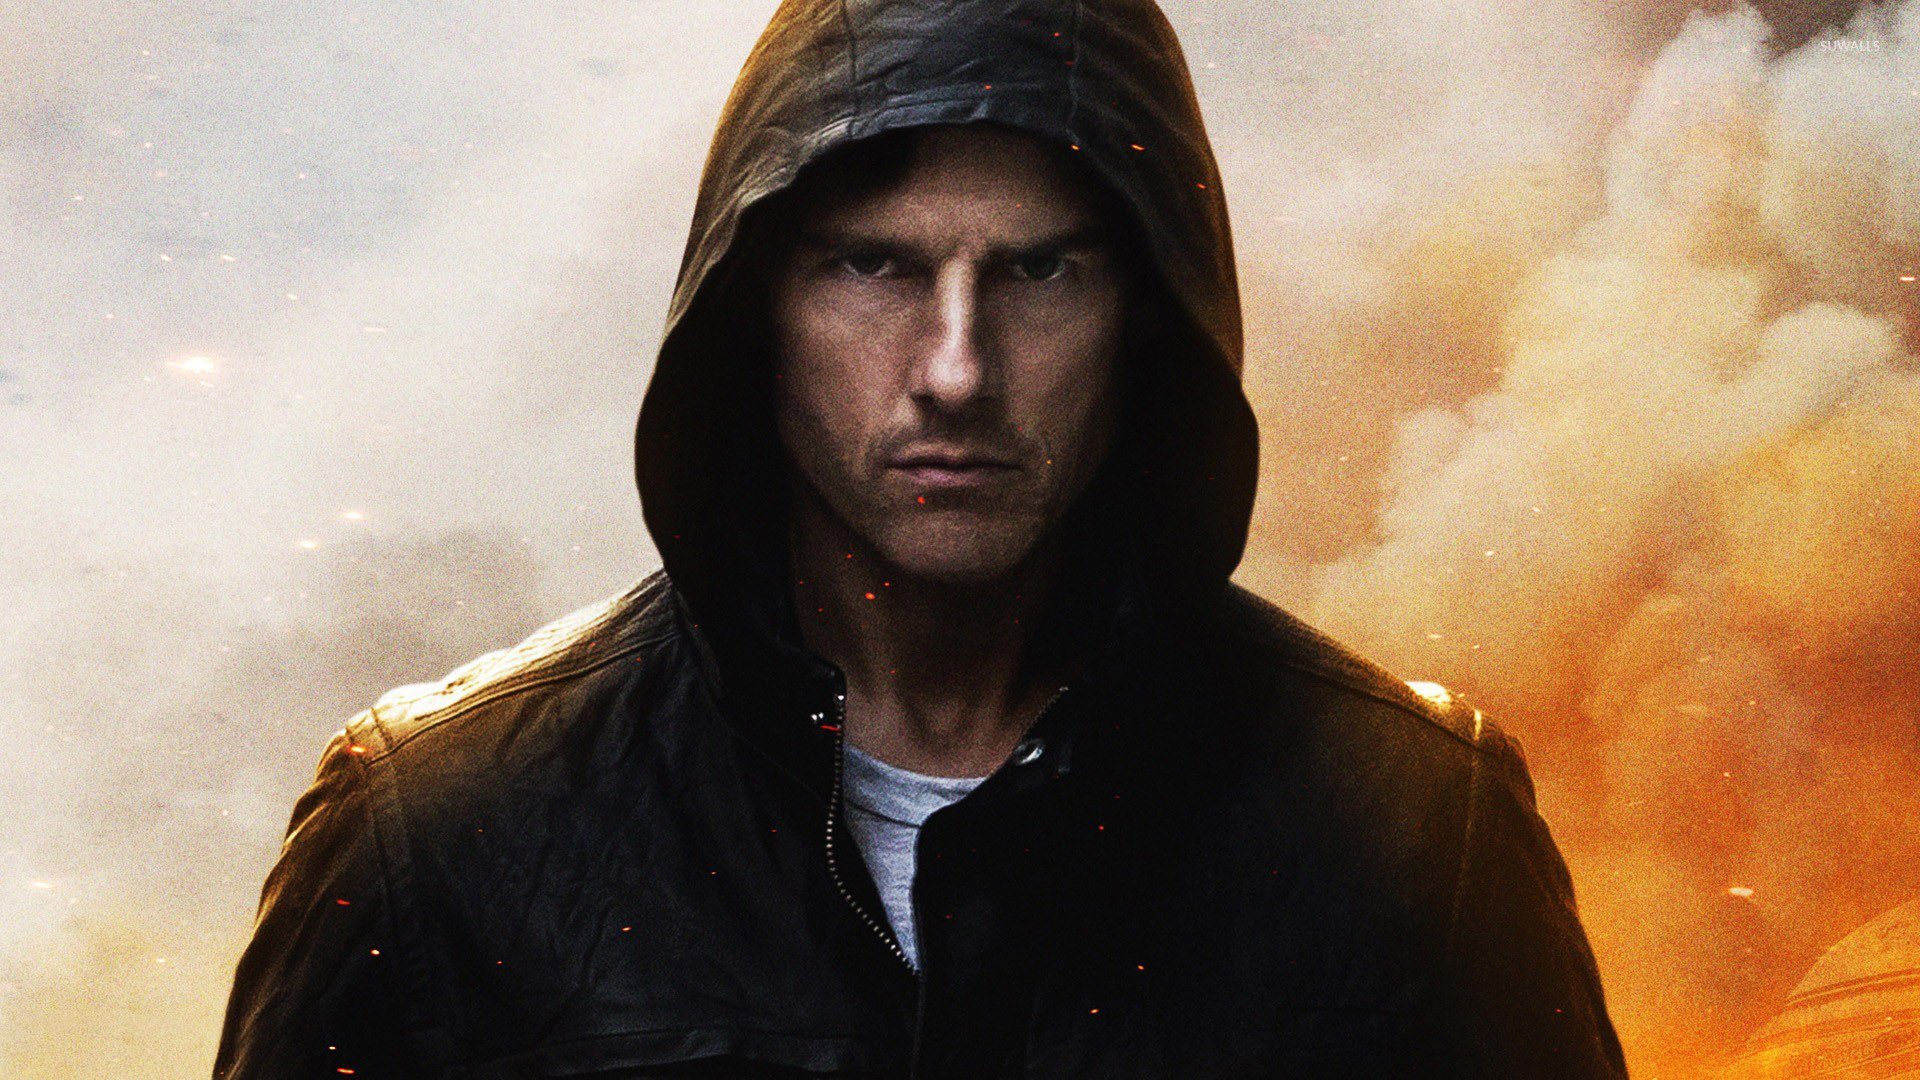 mission, Impossible, Movie, Film, 1mirn, Action, Cruise, Fighting